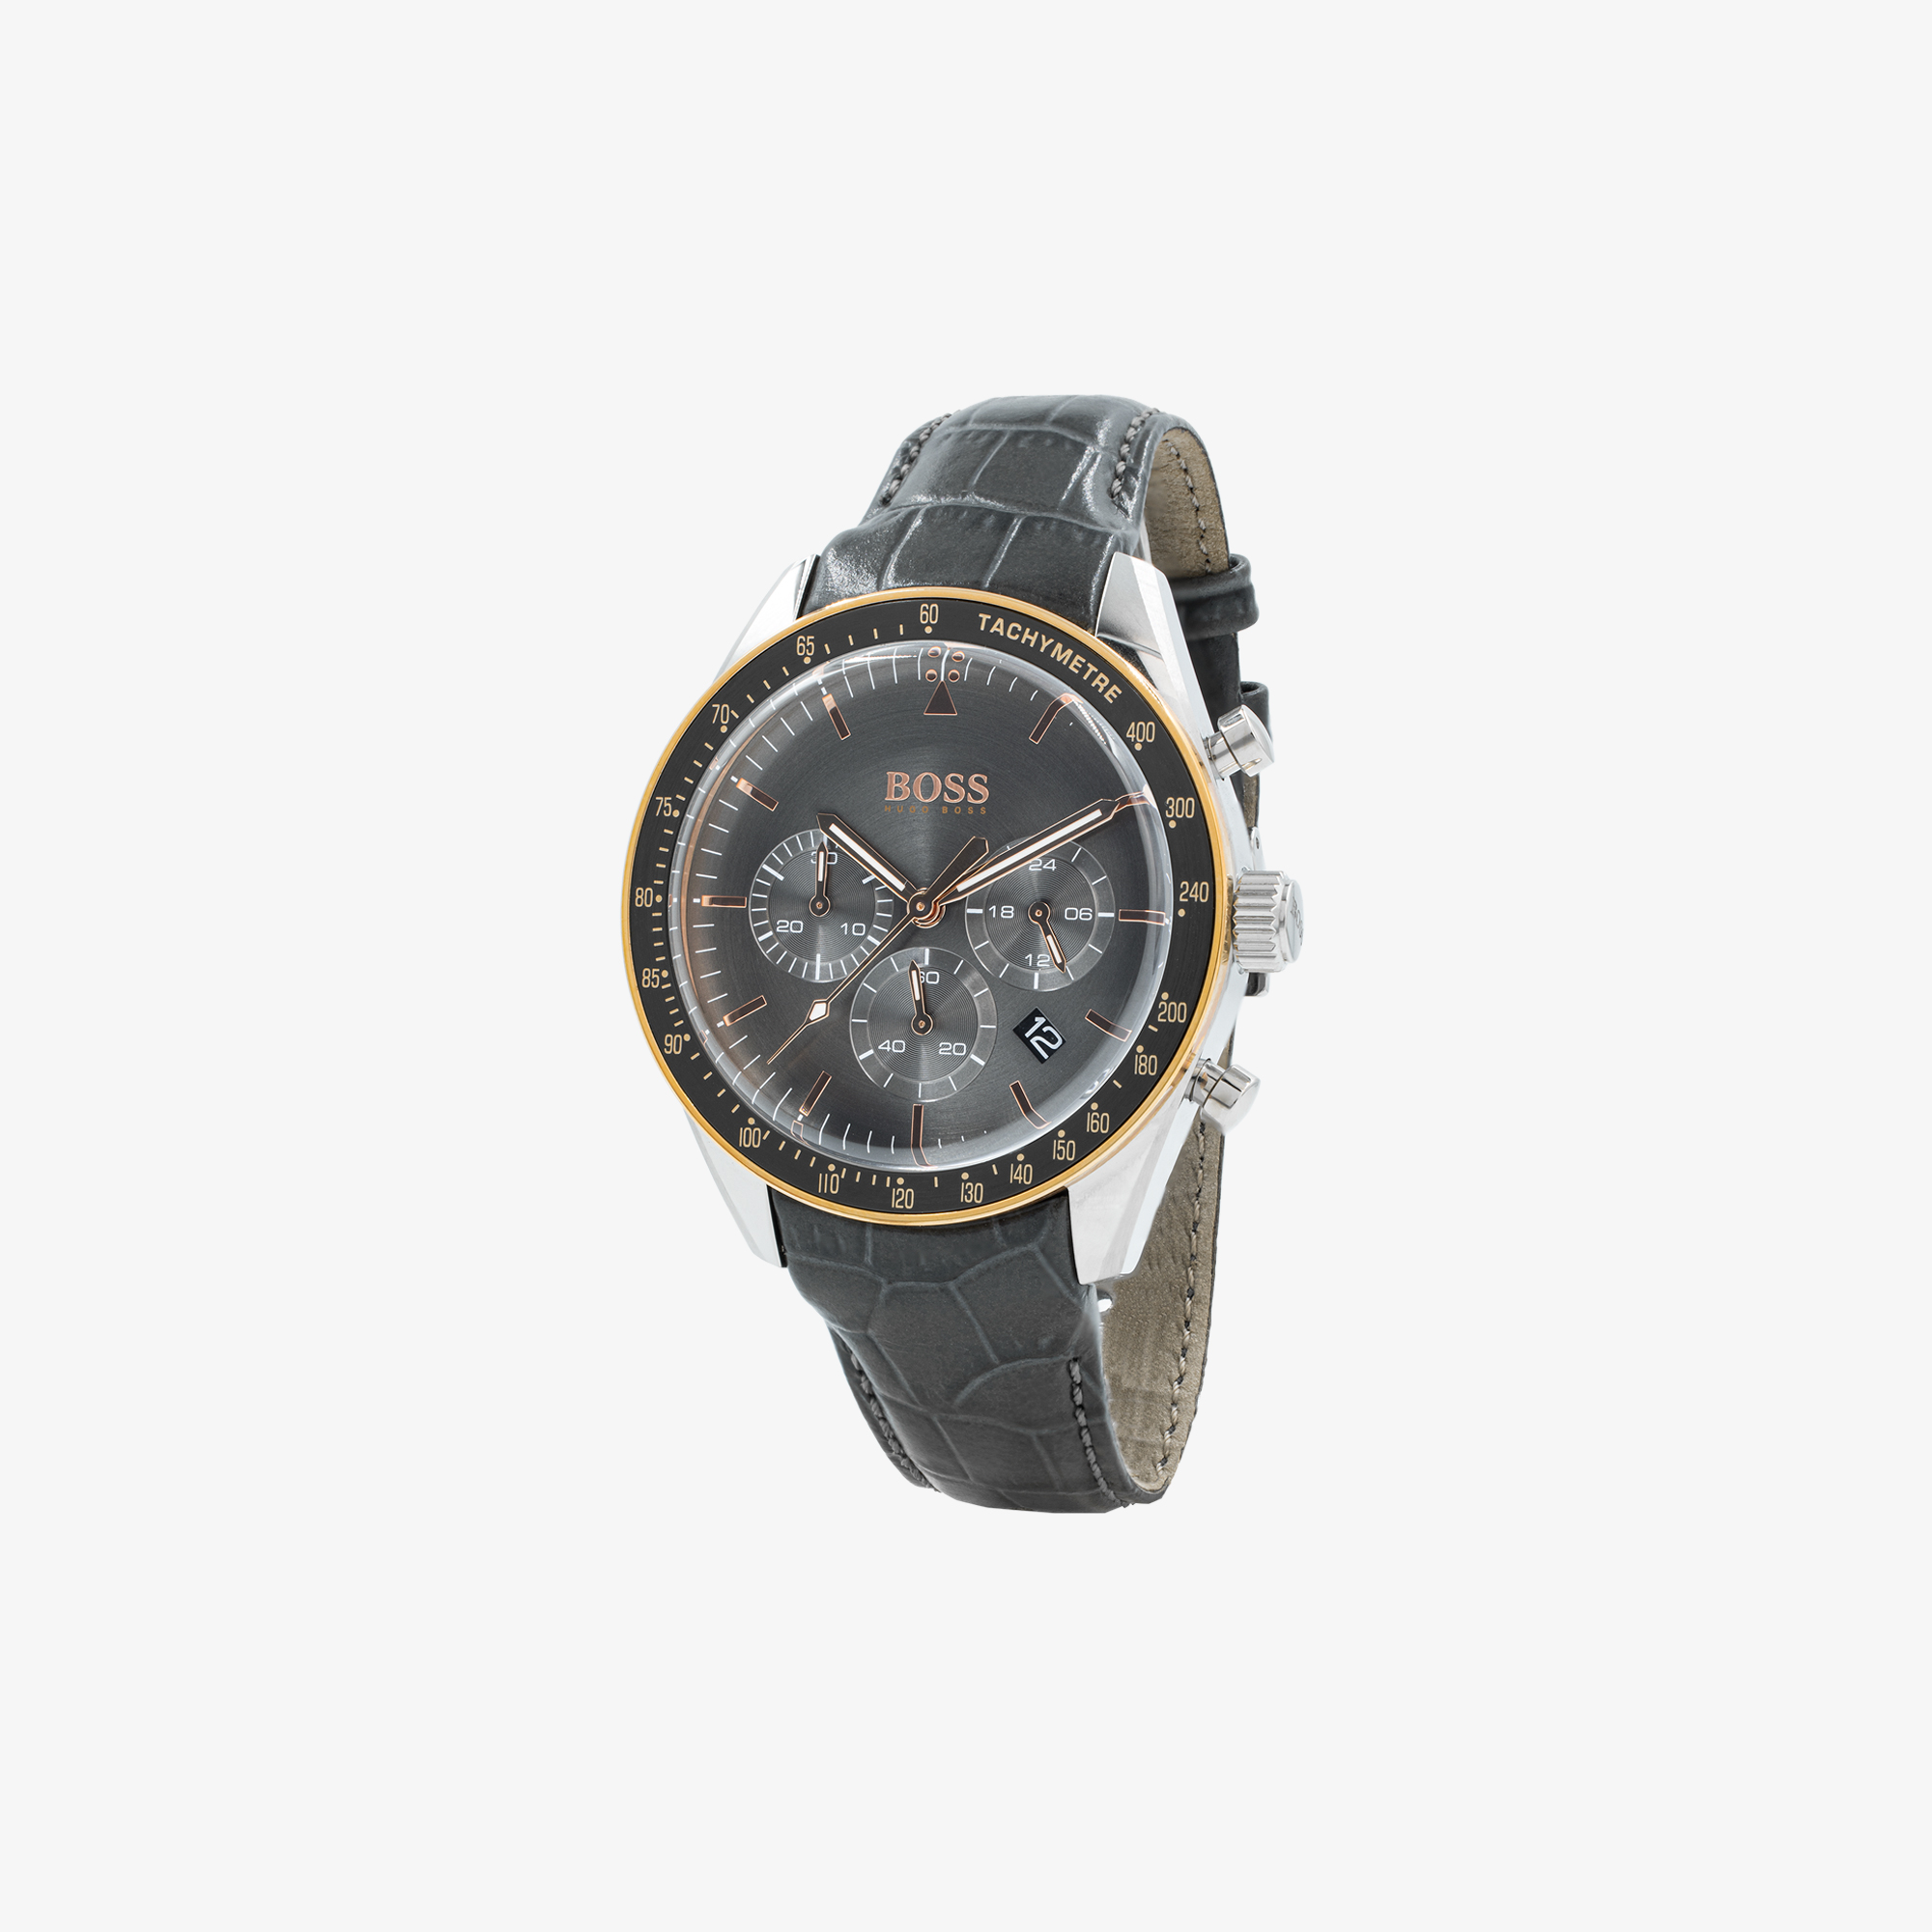 HUGO BOSS CHRONO DATE WITH GOLDPLATED RING